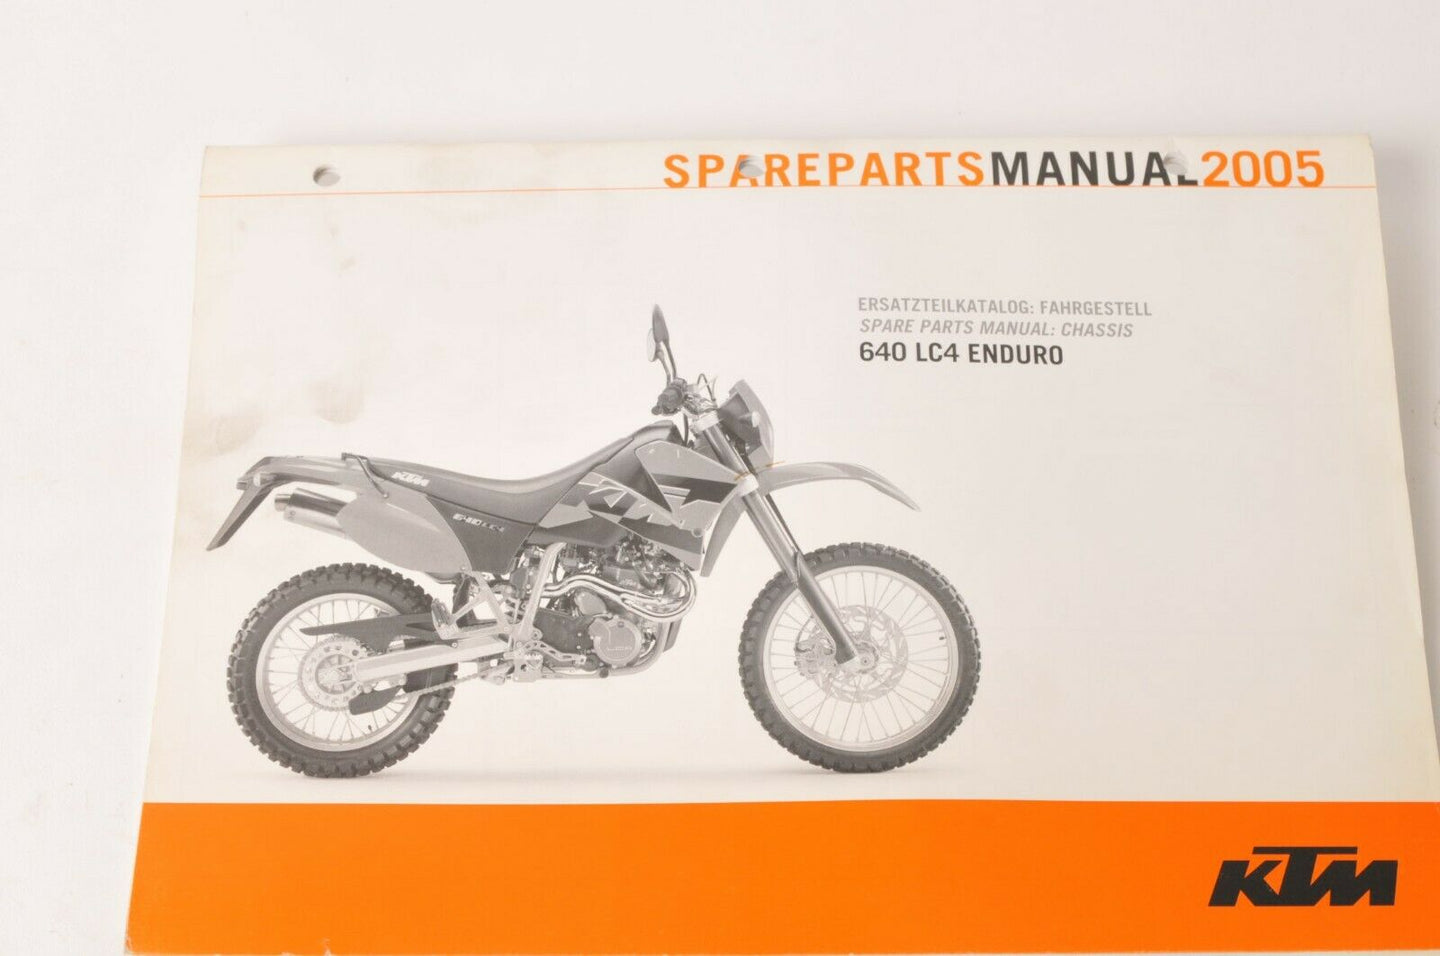 Genuine Factory KTM Spare Parts Manual Chassis - 640 LC4 Enduro 2005 | 3208178